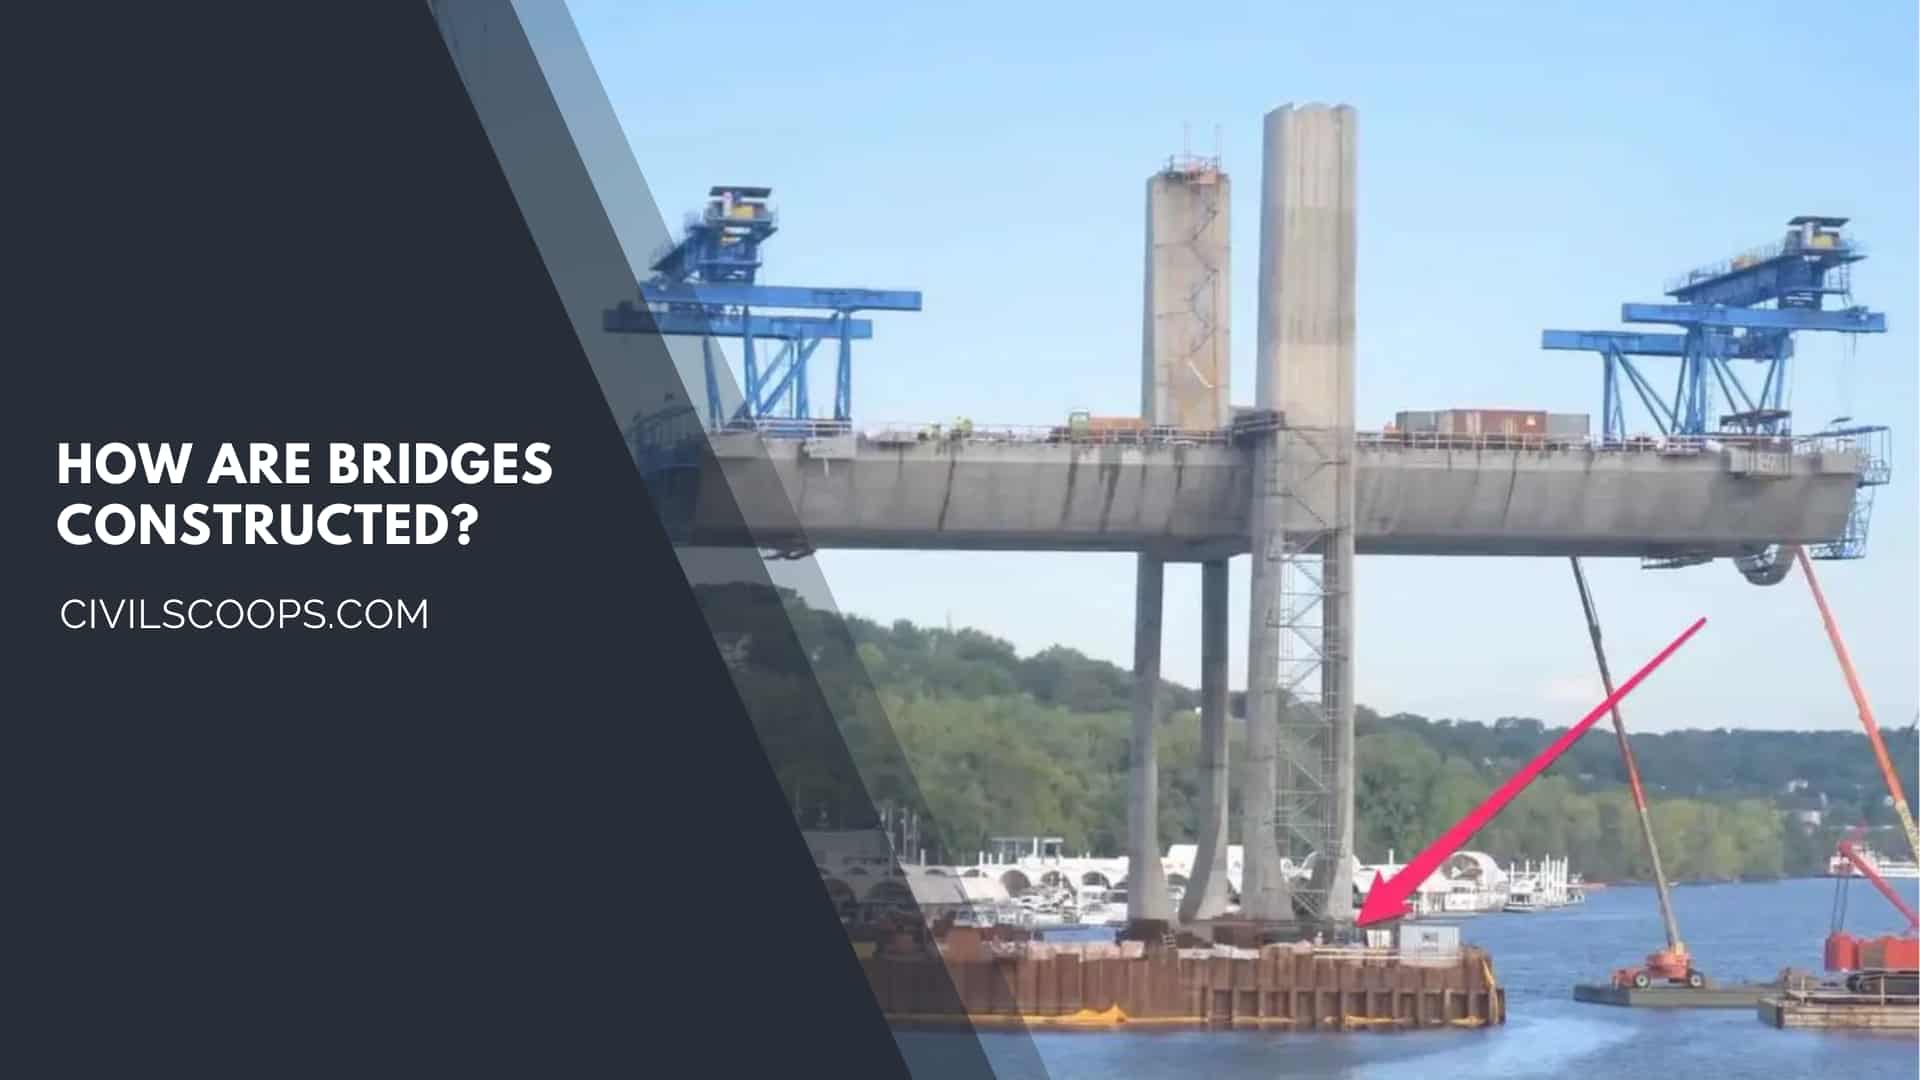 How Are Bridges Constructed?